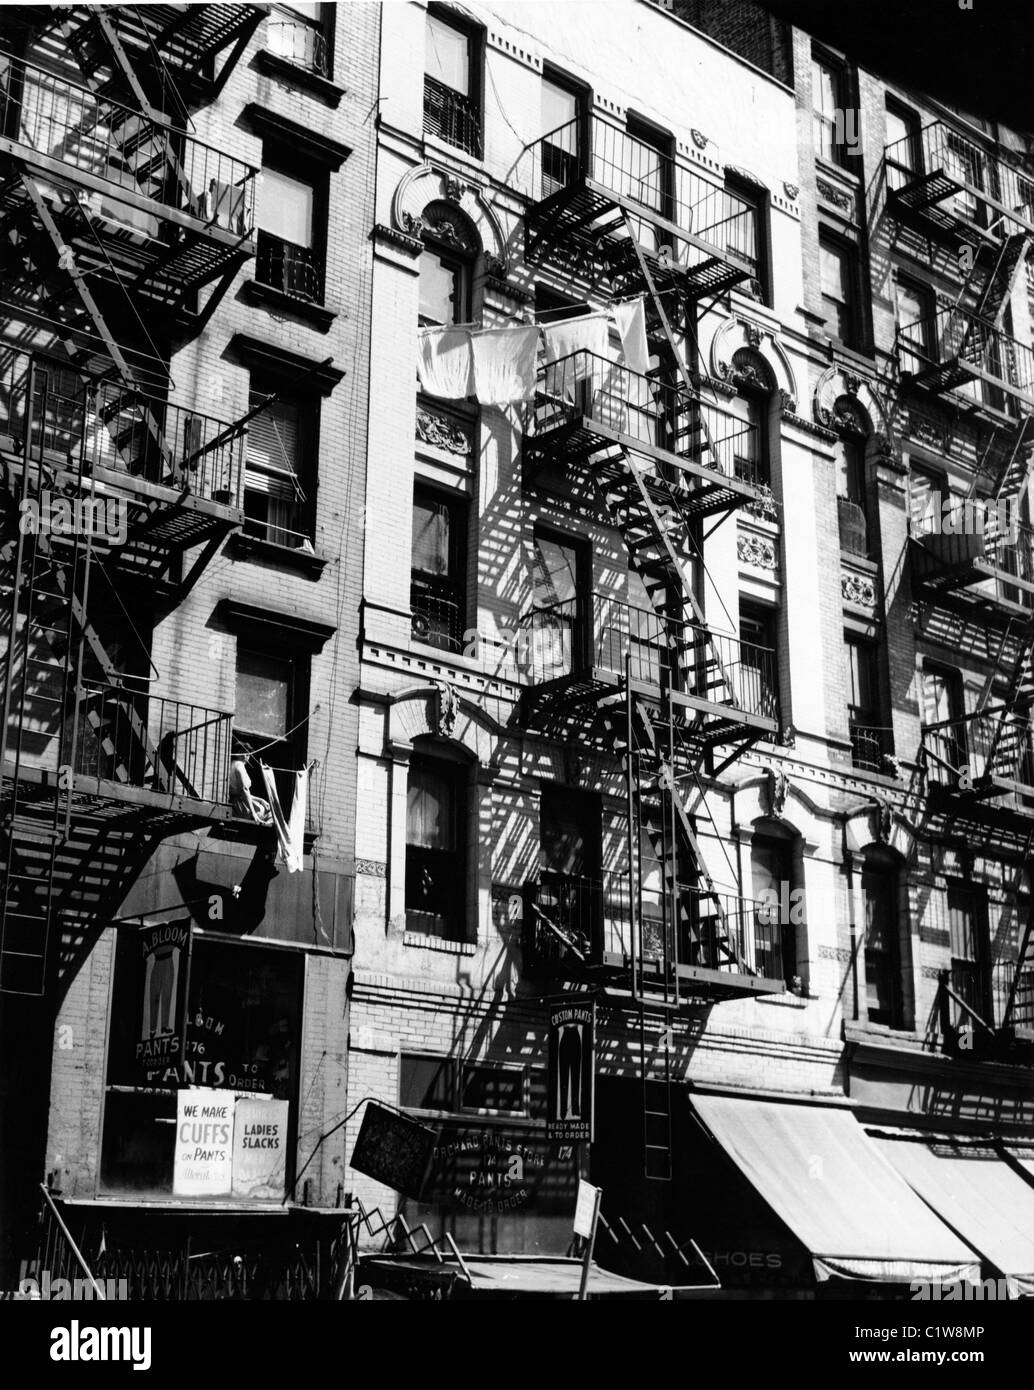 USA, New York City, low angle view of fire escapes of residential buildings Stock Photo